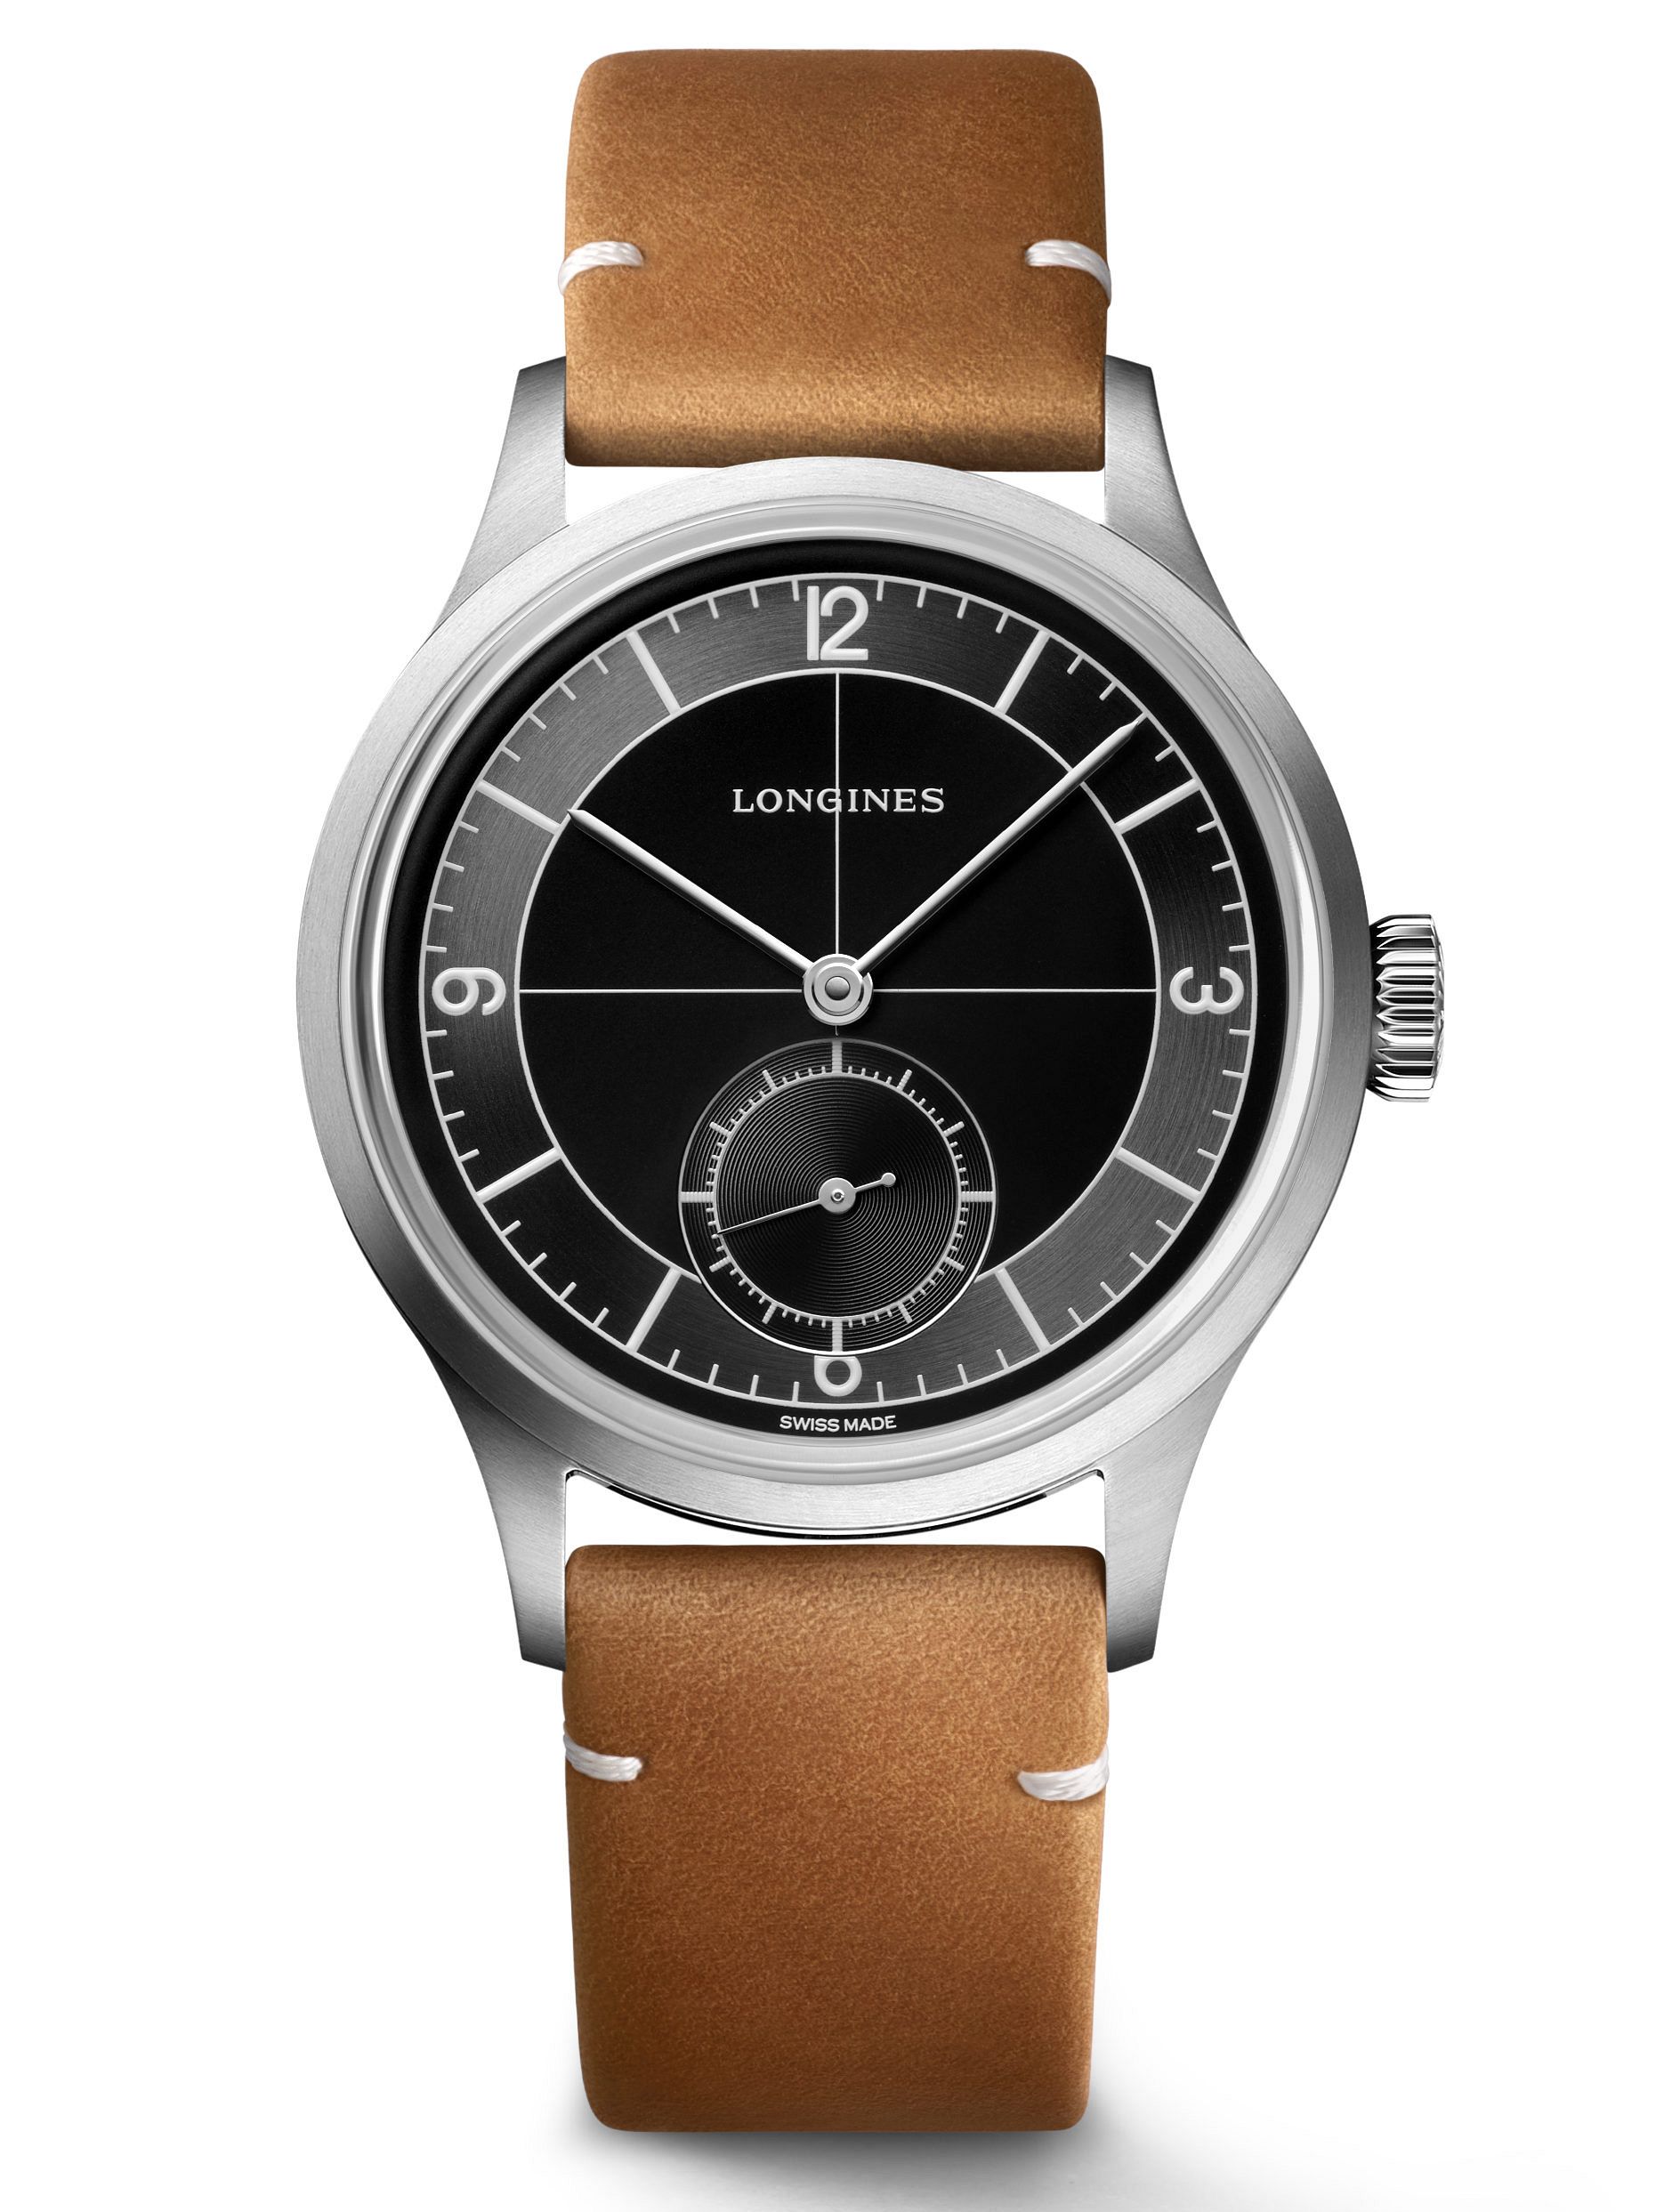 Longines Heritage Classic sector dial